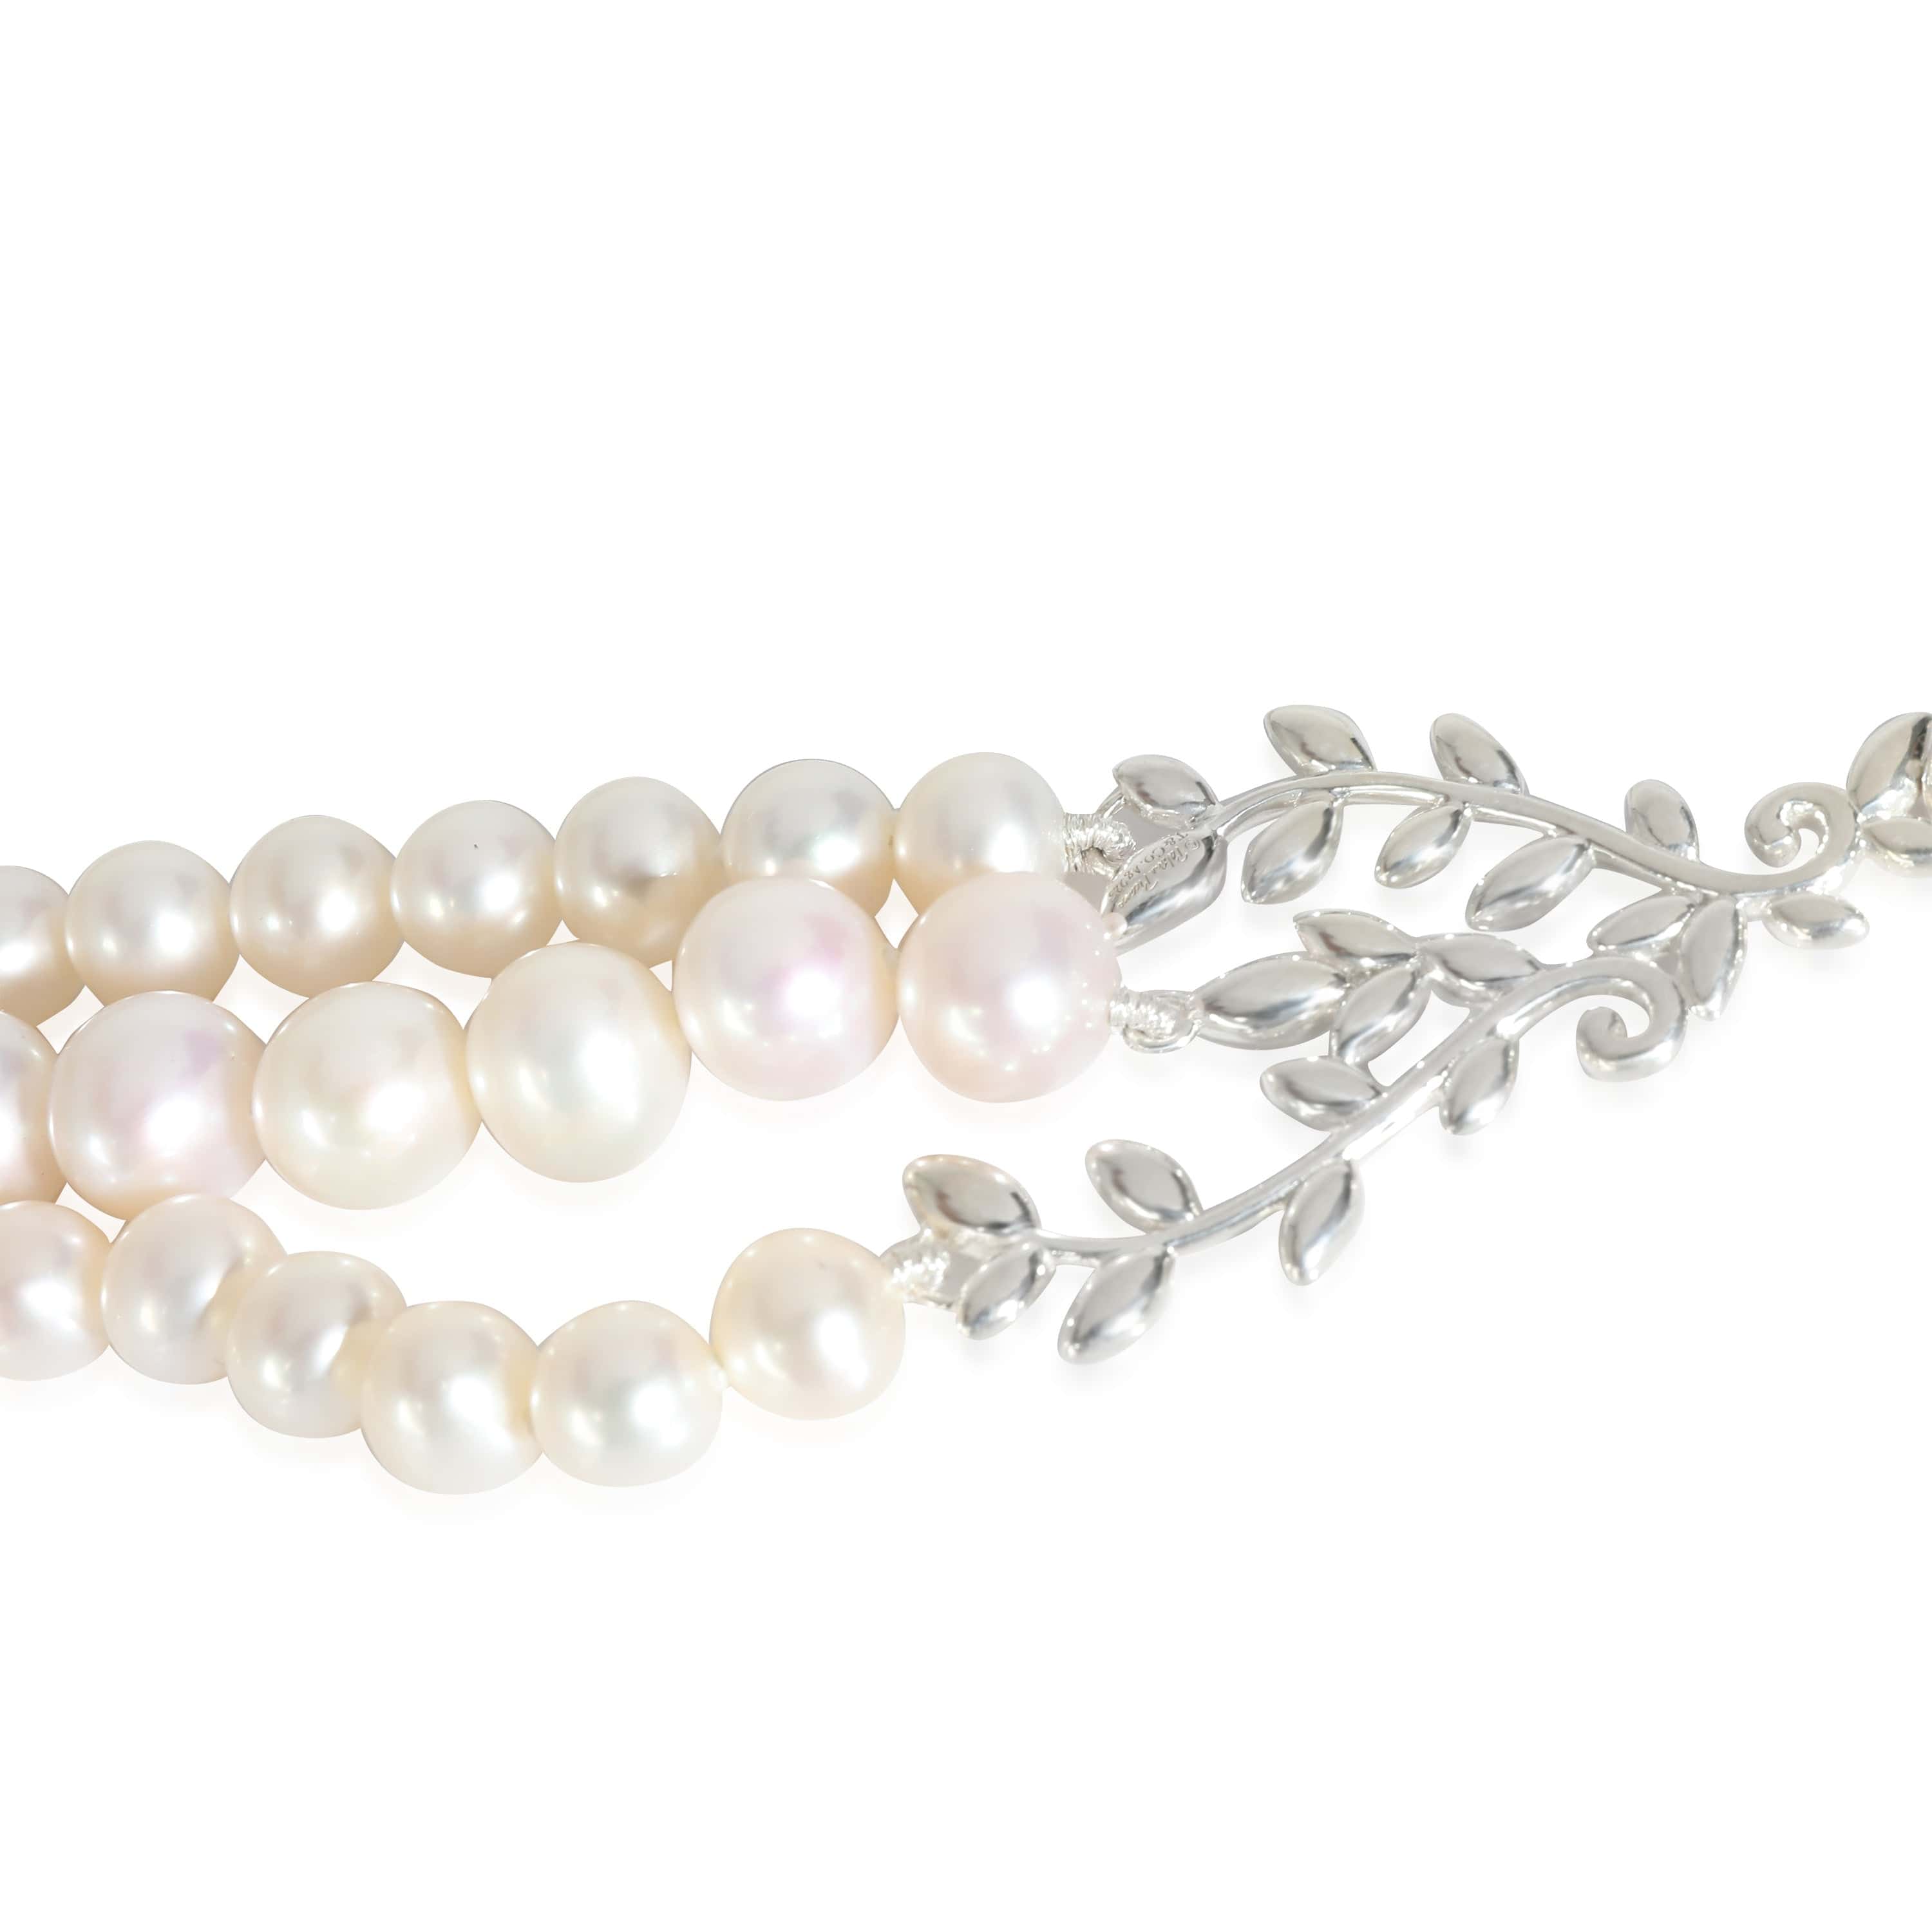 Tiffany & Co. Tiffany & Co. Paloma Picasso Pearl Necklace in  Sterling Silver